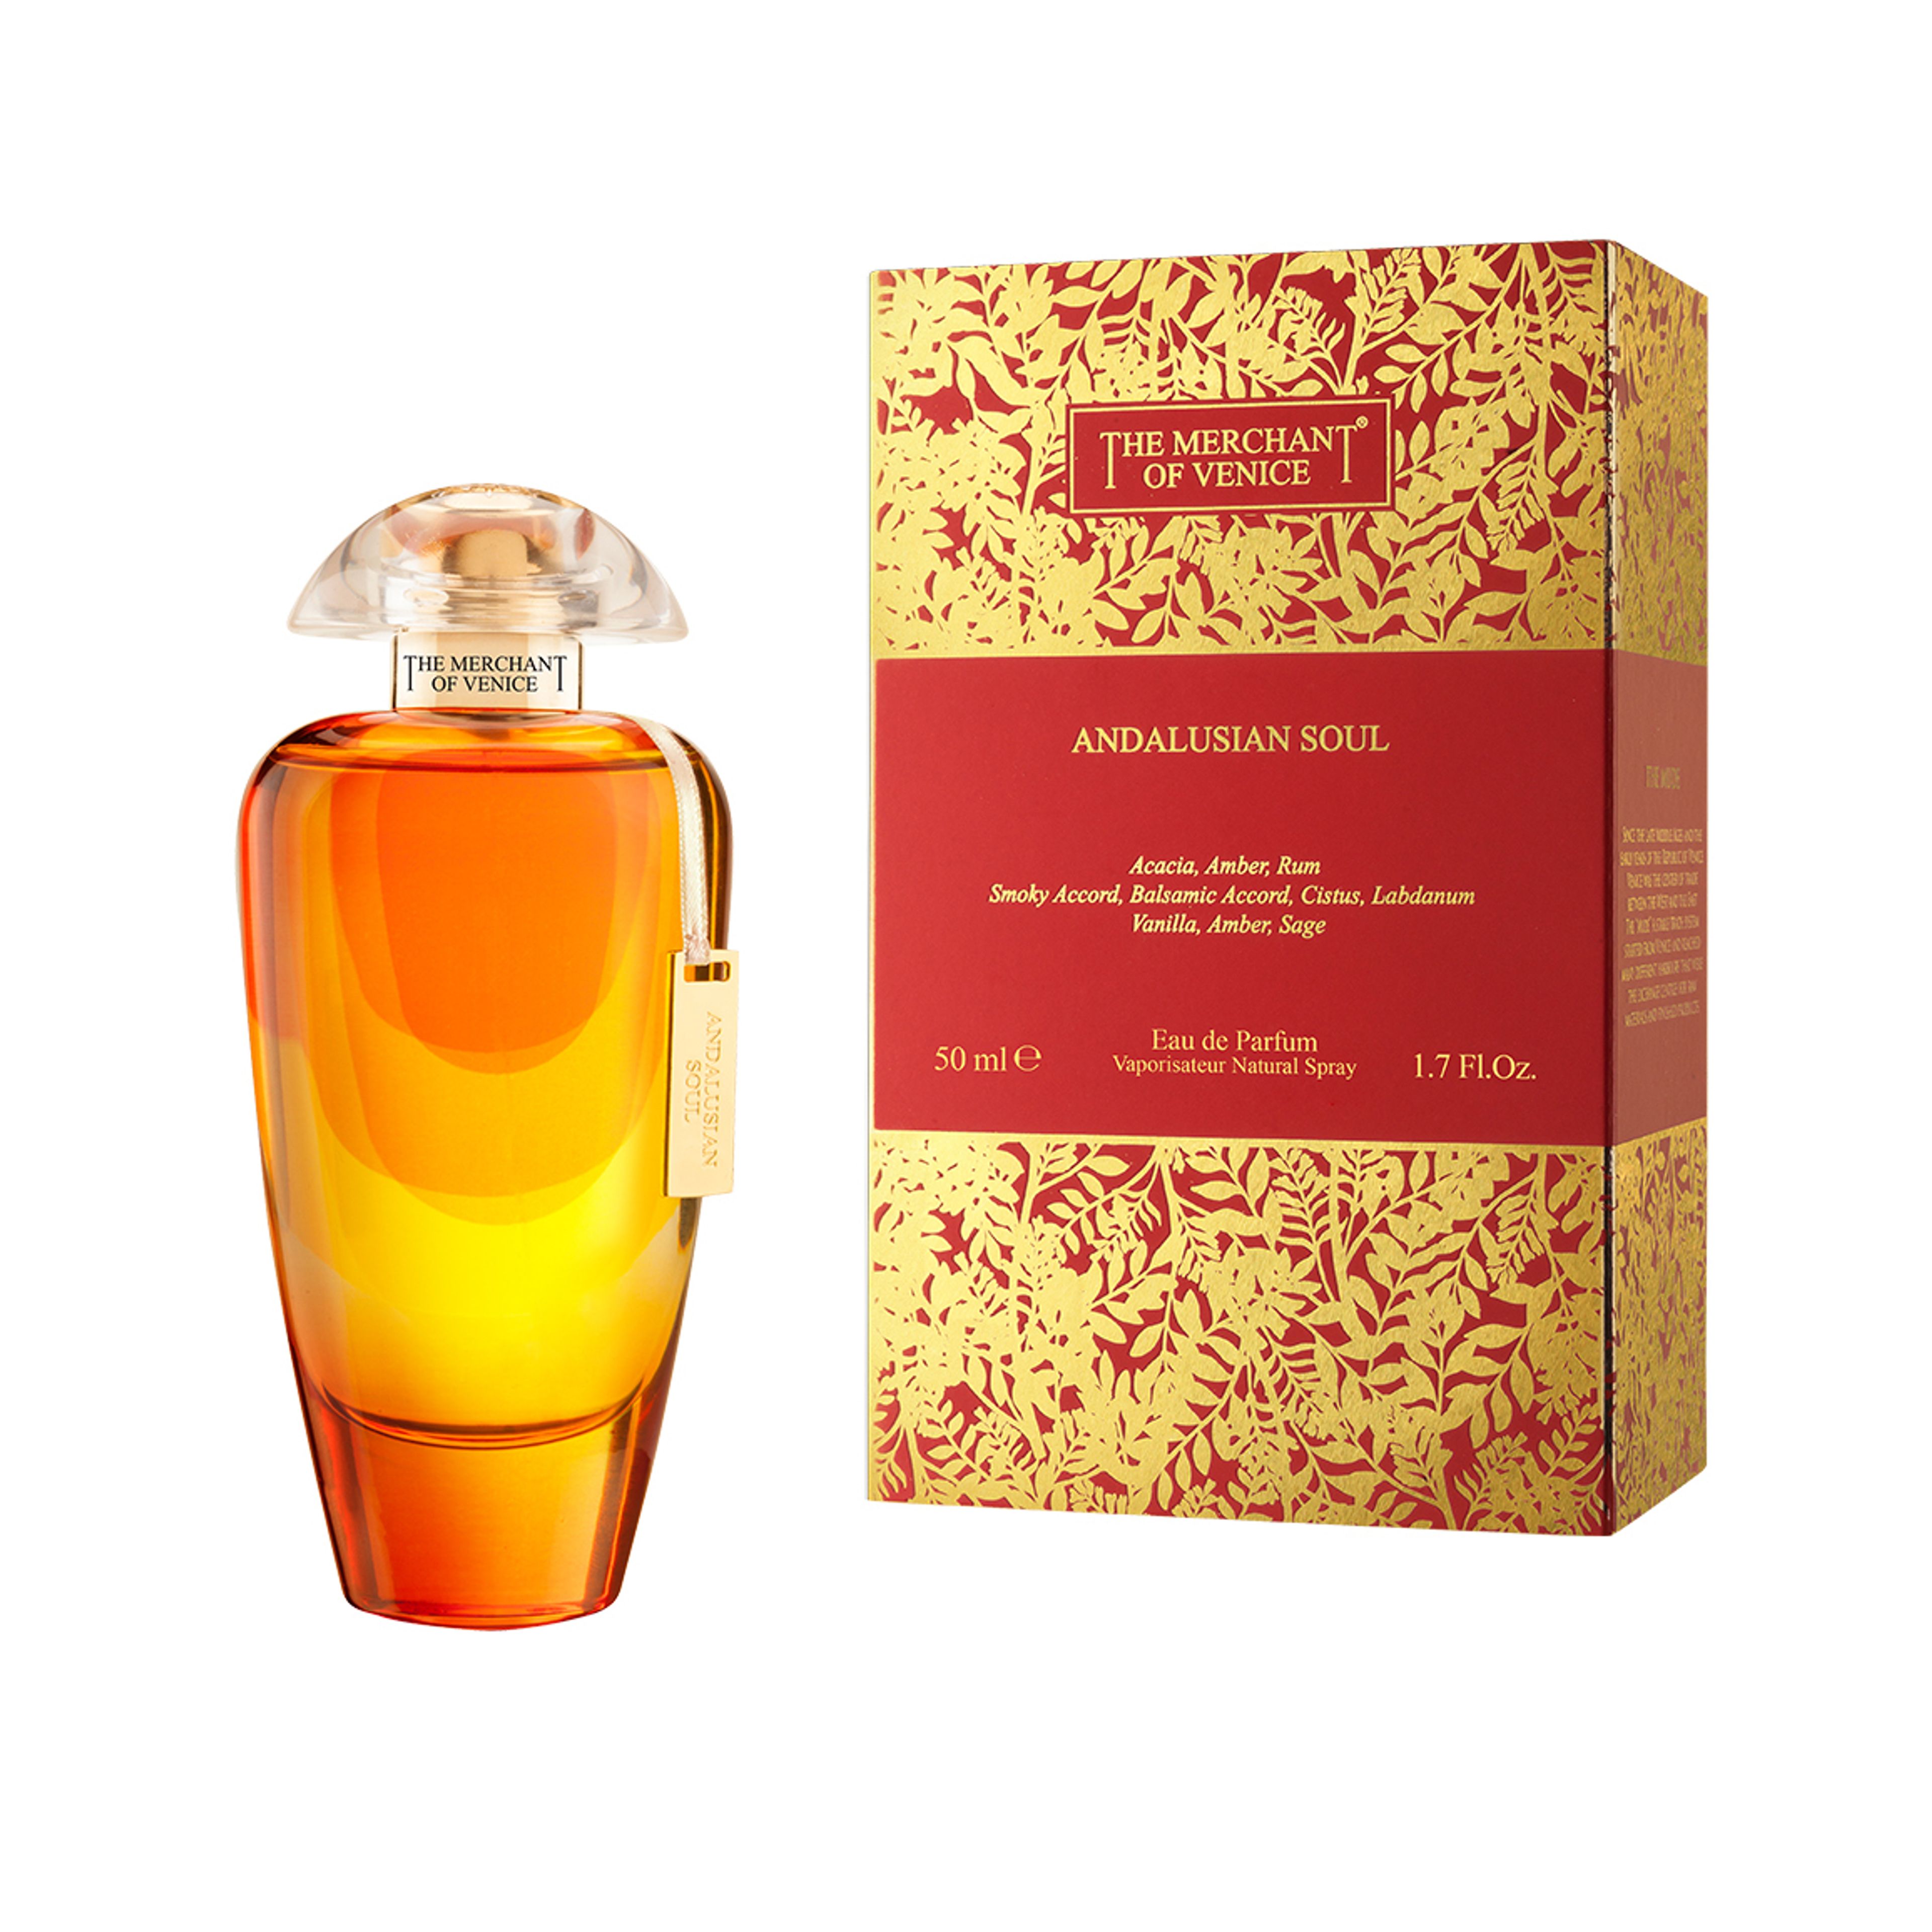 The Merchant of Venice Andalusian Soul Edp 2